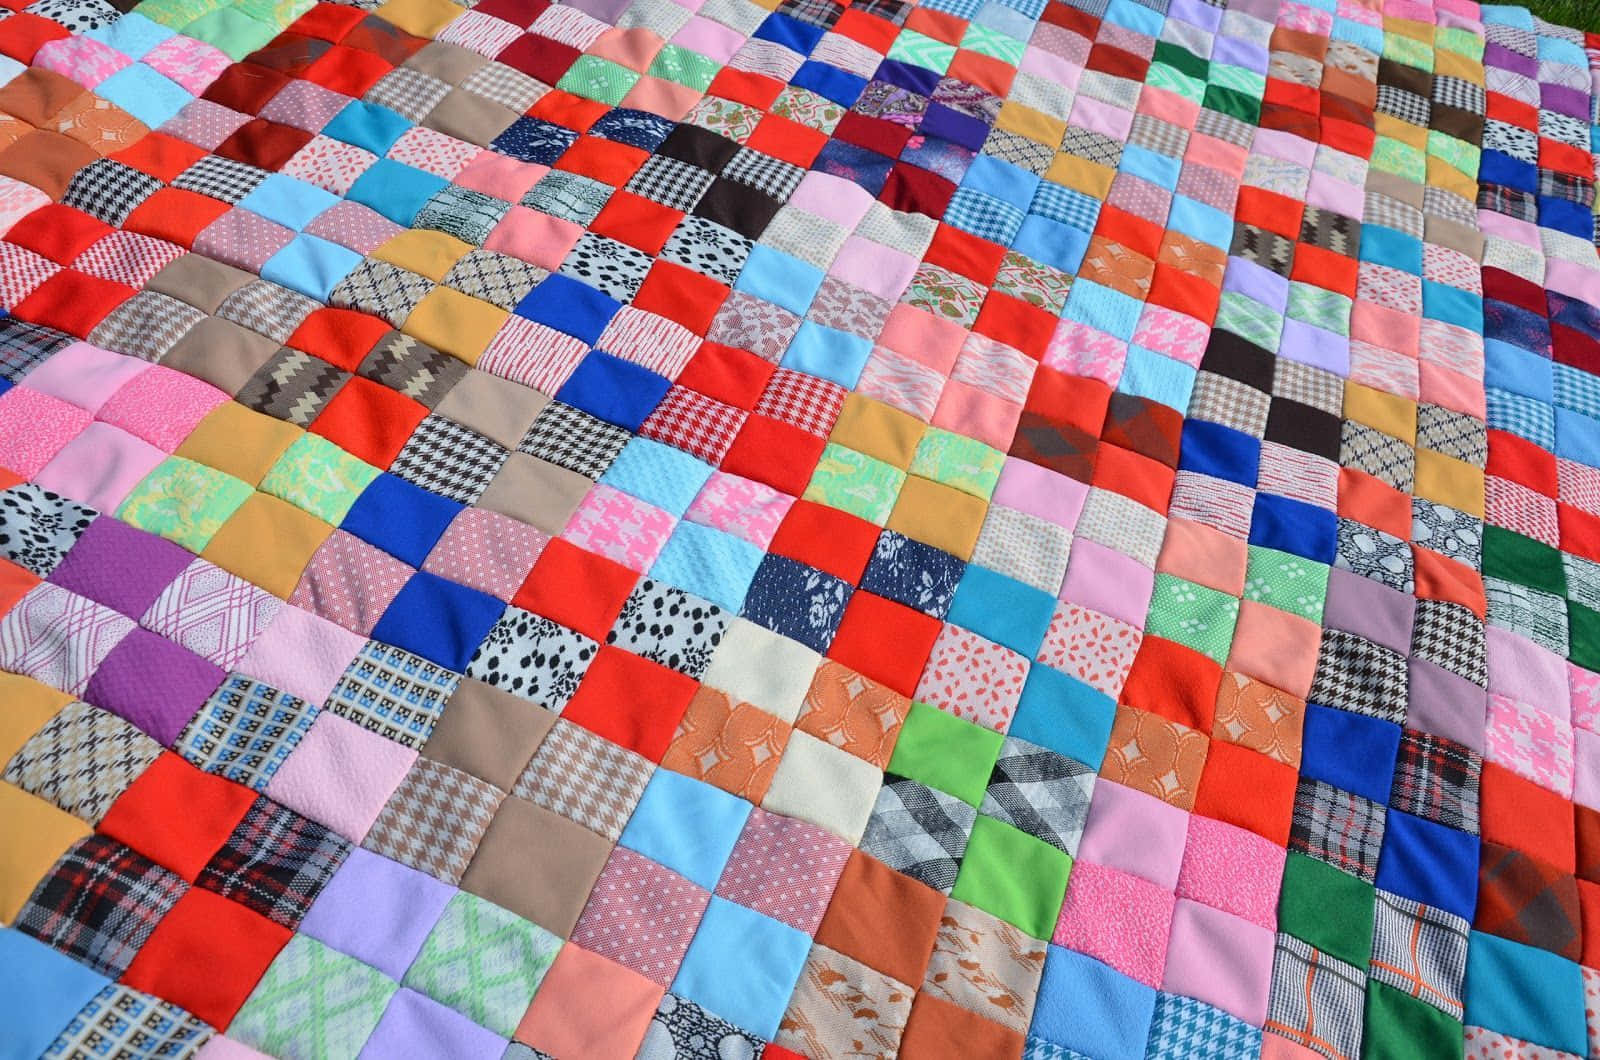 A close-up of traditional patchwork quilt stitching Wallpaper